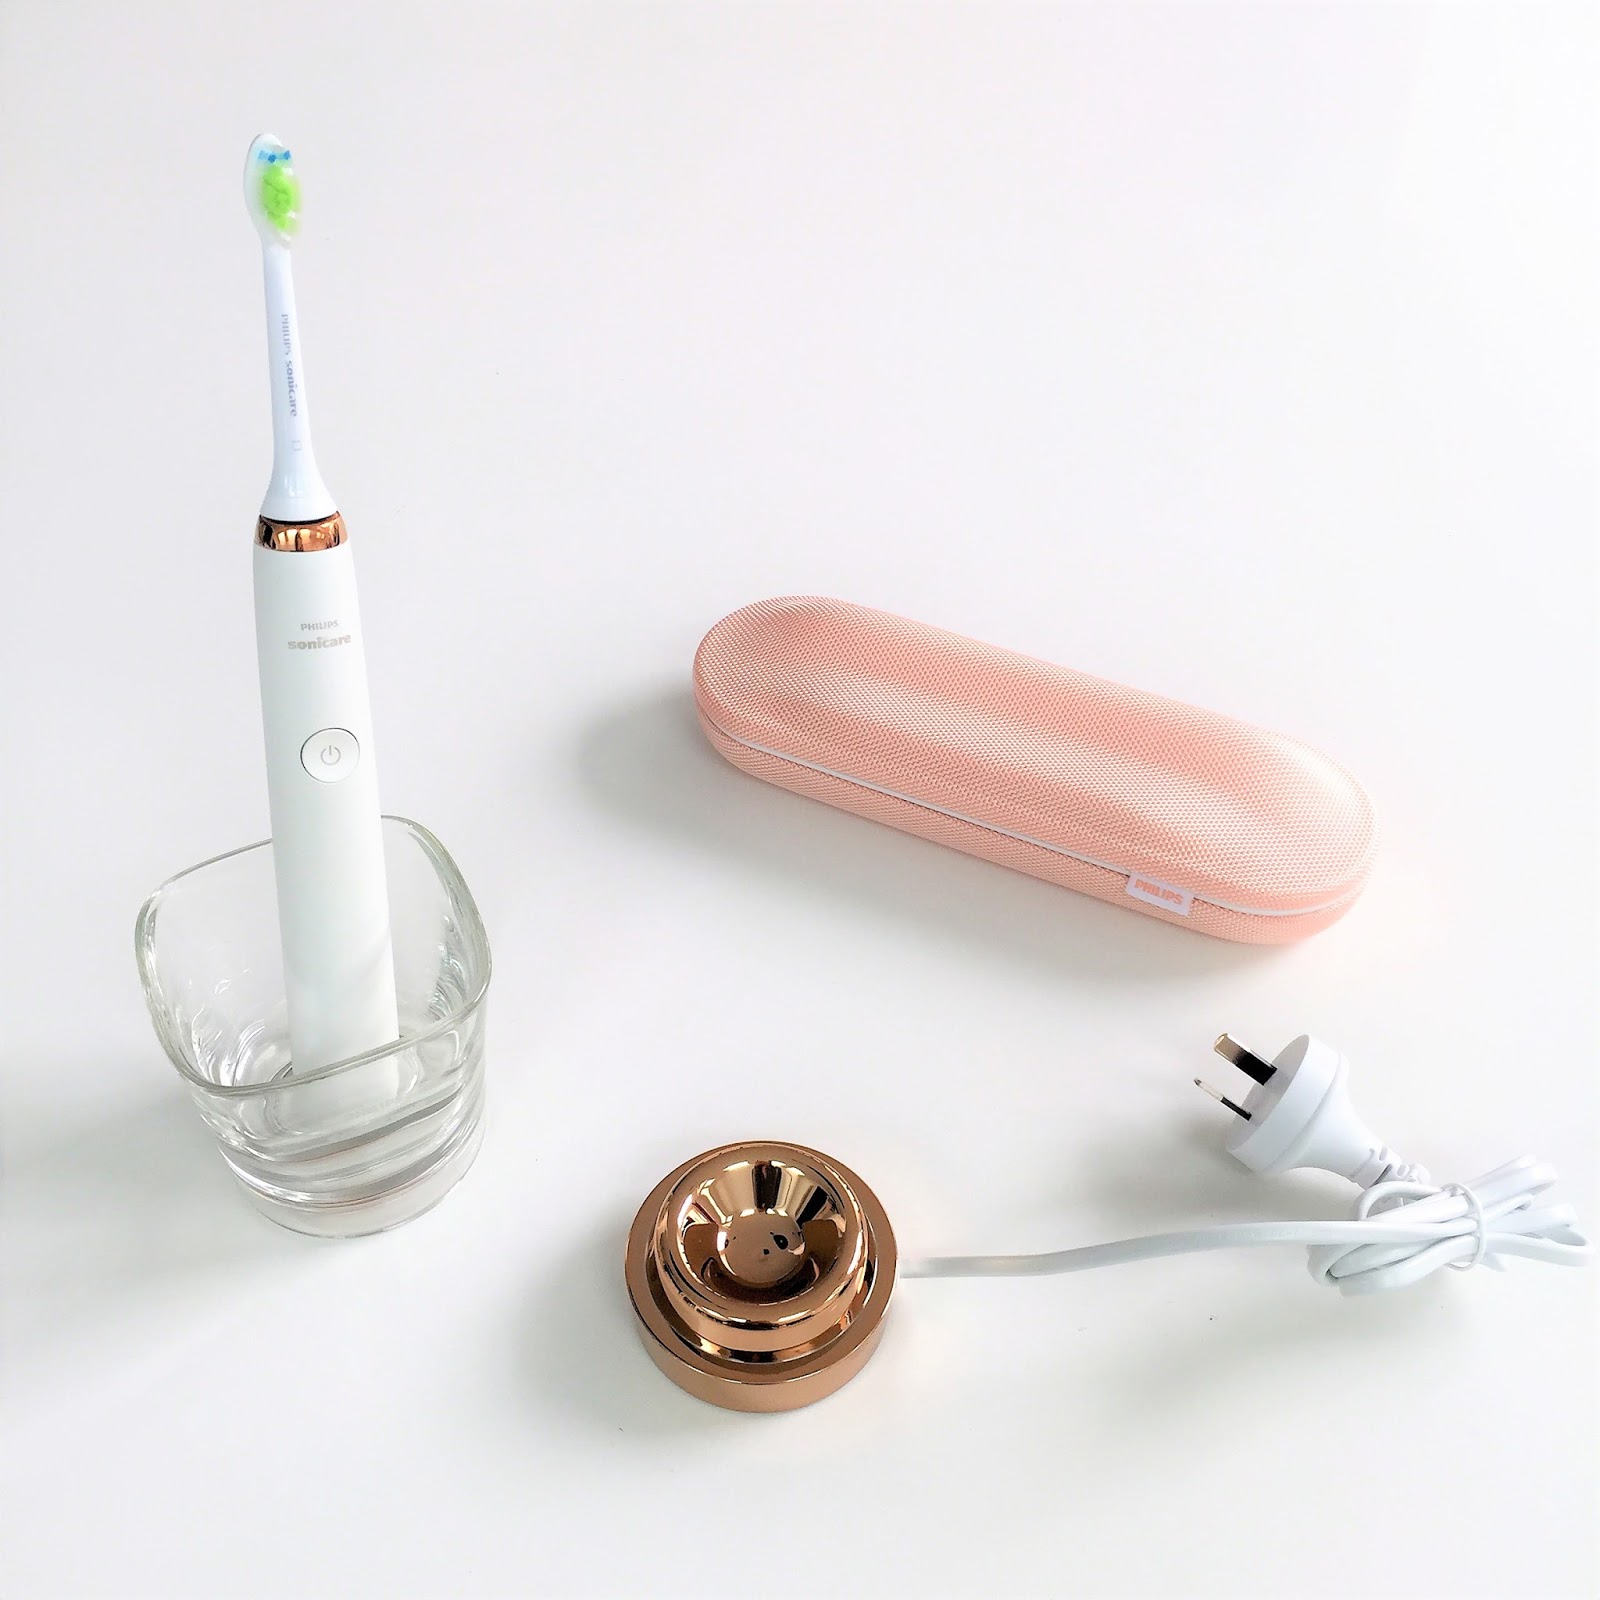 REVIEW: PHILIPS SONICARE DIAMONDCLEAN ELECTRIC TOOTHBRUSH ROSE GOLD EDITION | The Beauty & Hunter